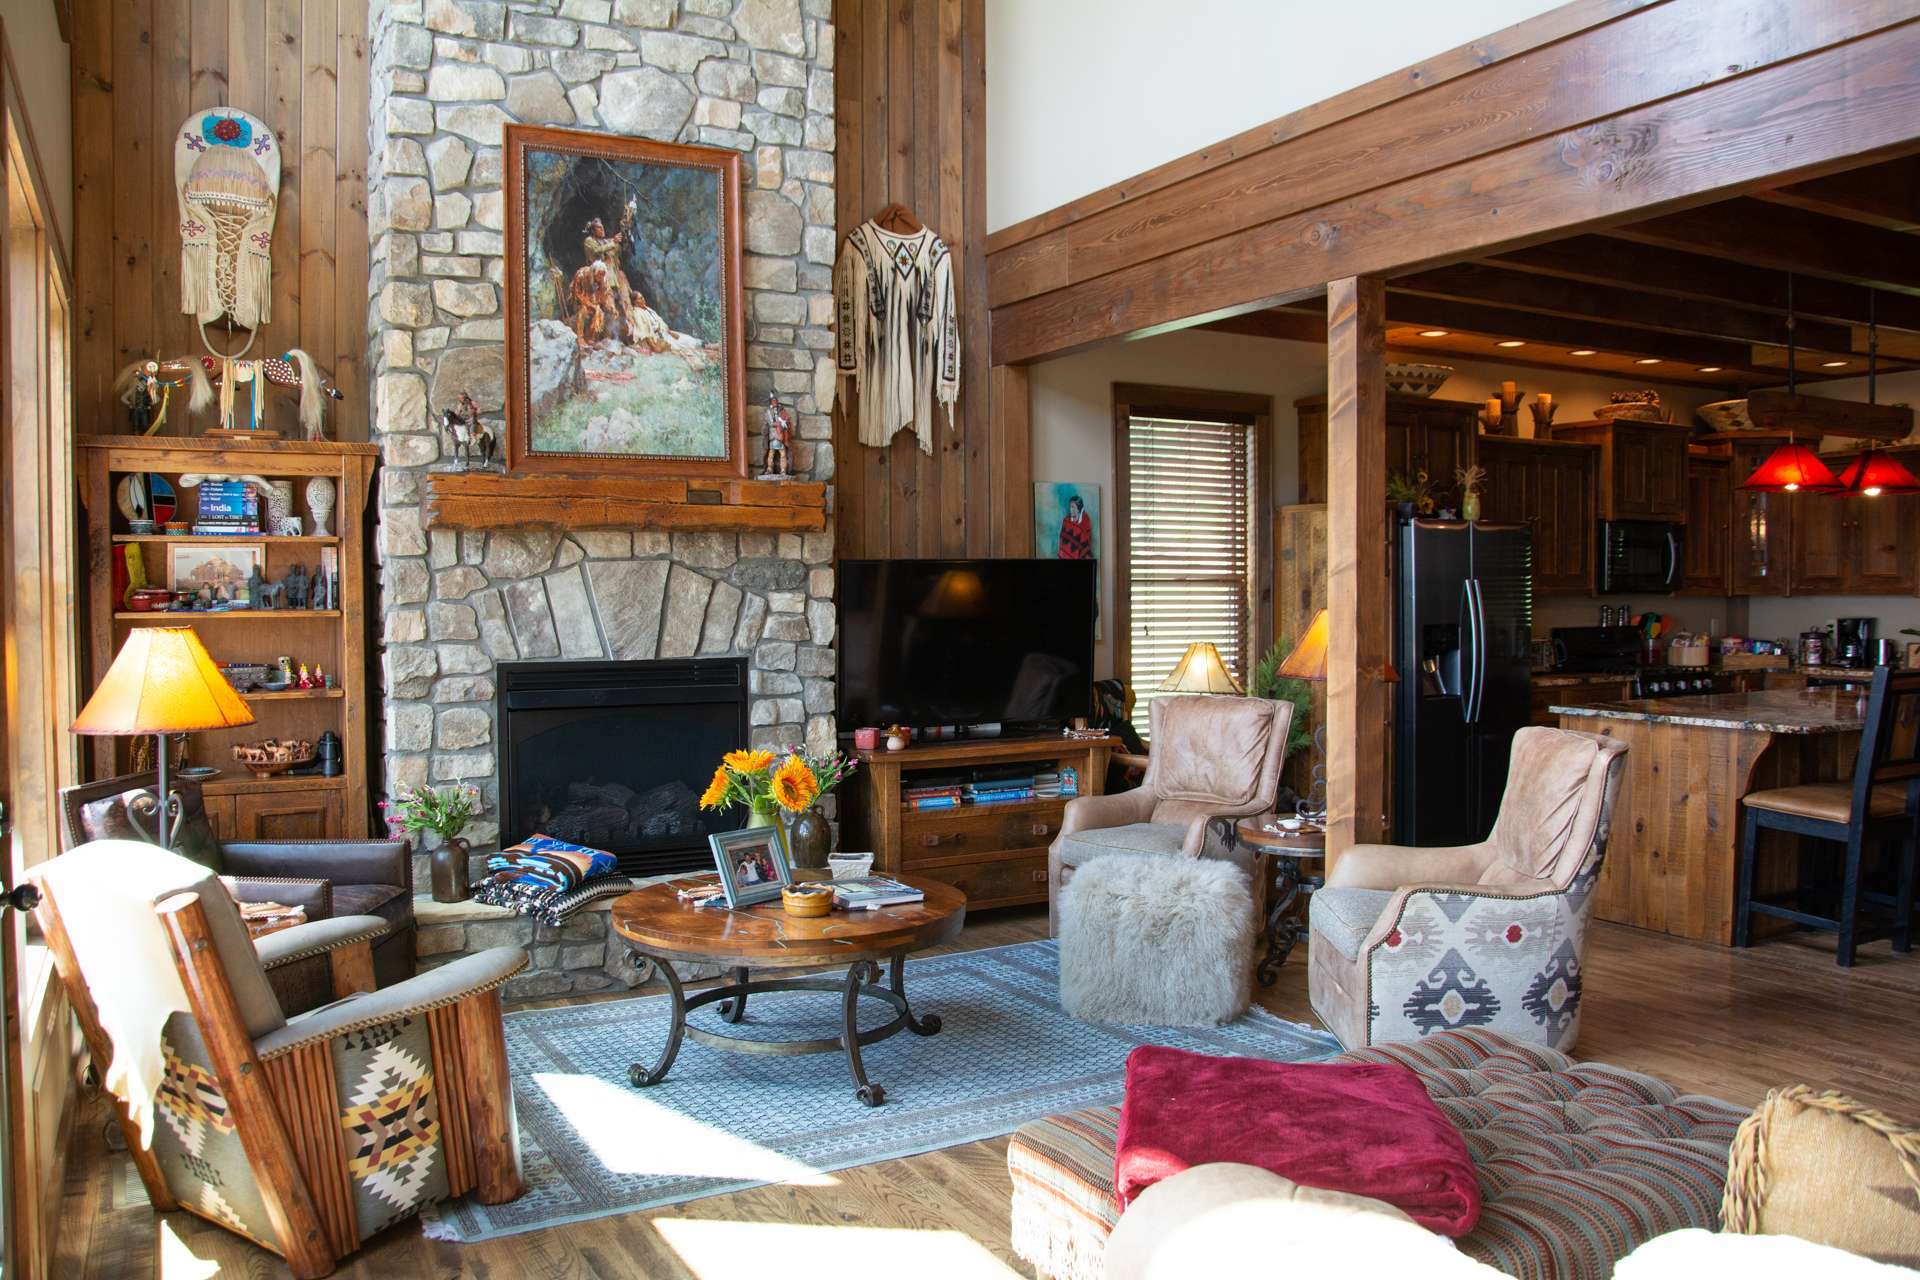 The main level offers a spacious vaulted great room featuring exposed beams, a 2-story stone fireplace and a wall of windows filling the area with natural light and the incredible views.